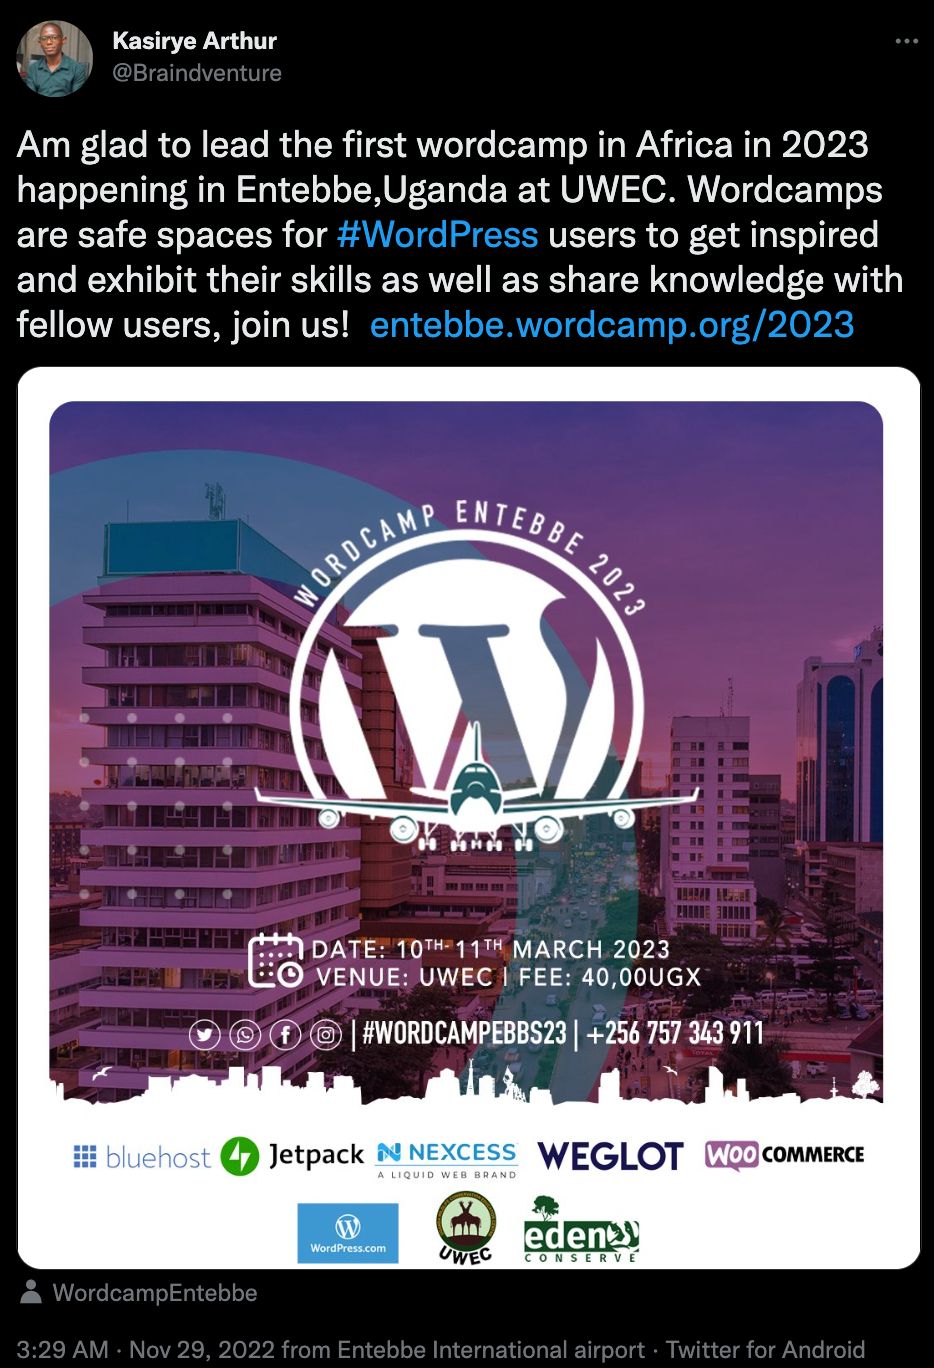 Kasirye Arthur's tweet that reads "Am glad to lead the first wordcamp in Africa in 2023 happening in Entebbe,Uganda at UWEC. Wordcamps are safe spaces for #WordPress users to get inspired and exhibit their skills as well as share knowledge with fellow users, join us!  http://entebbe.wordcamp.org/2023"